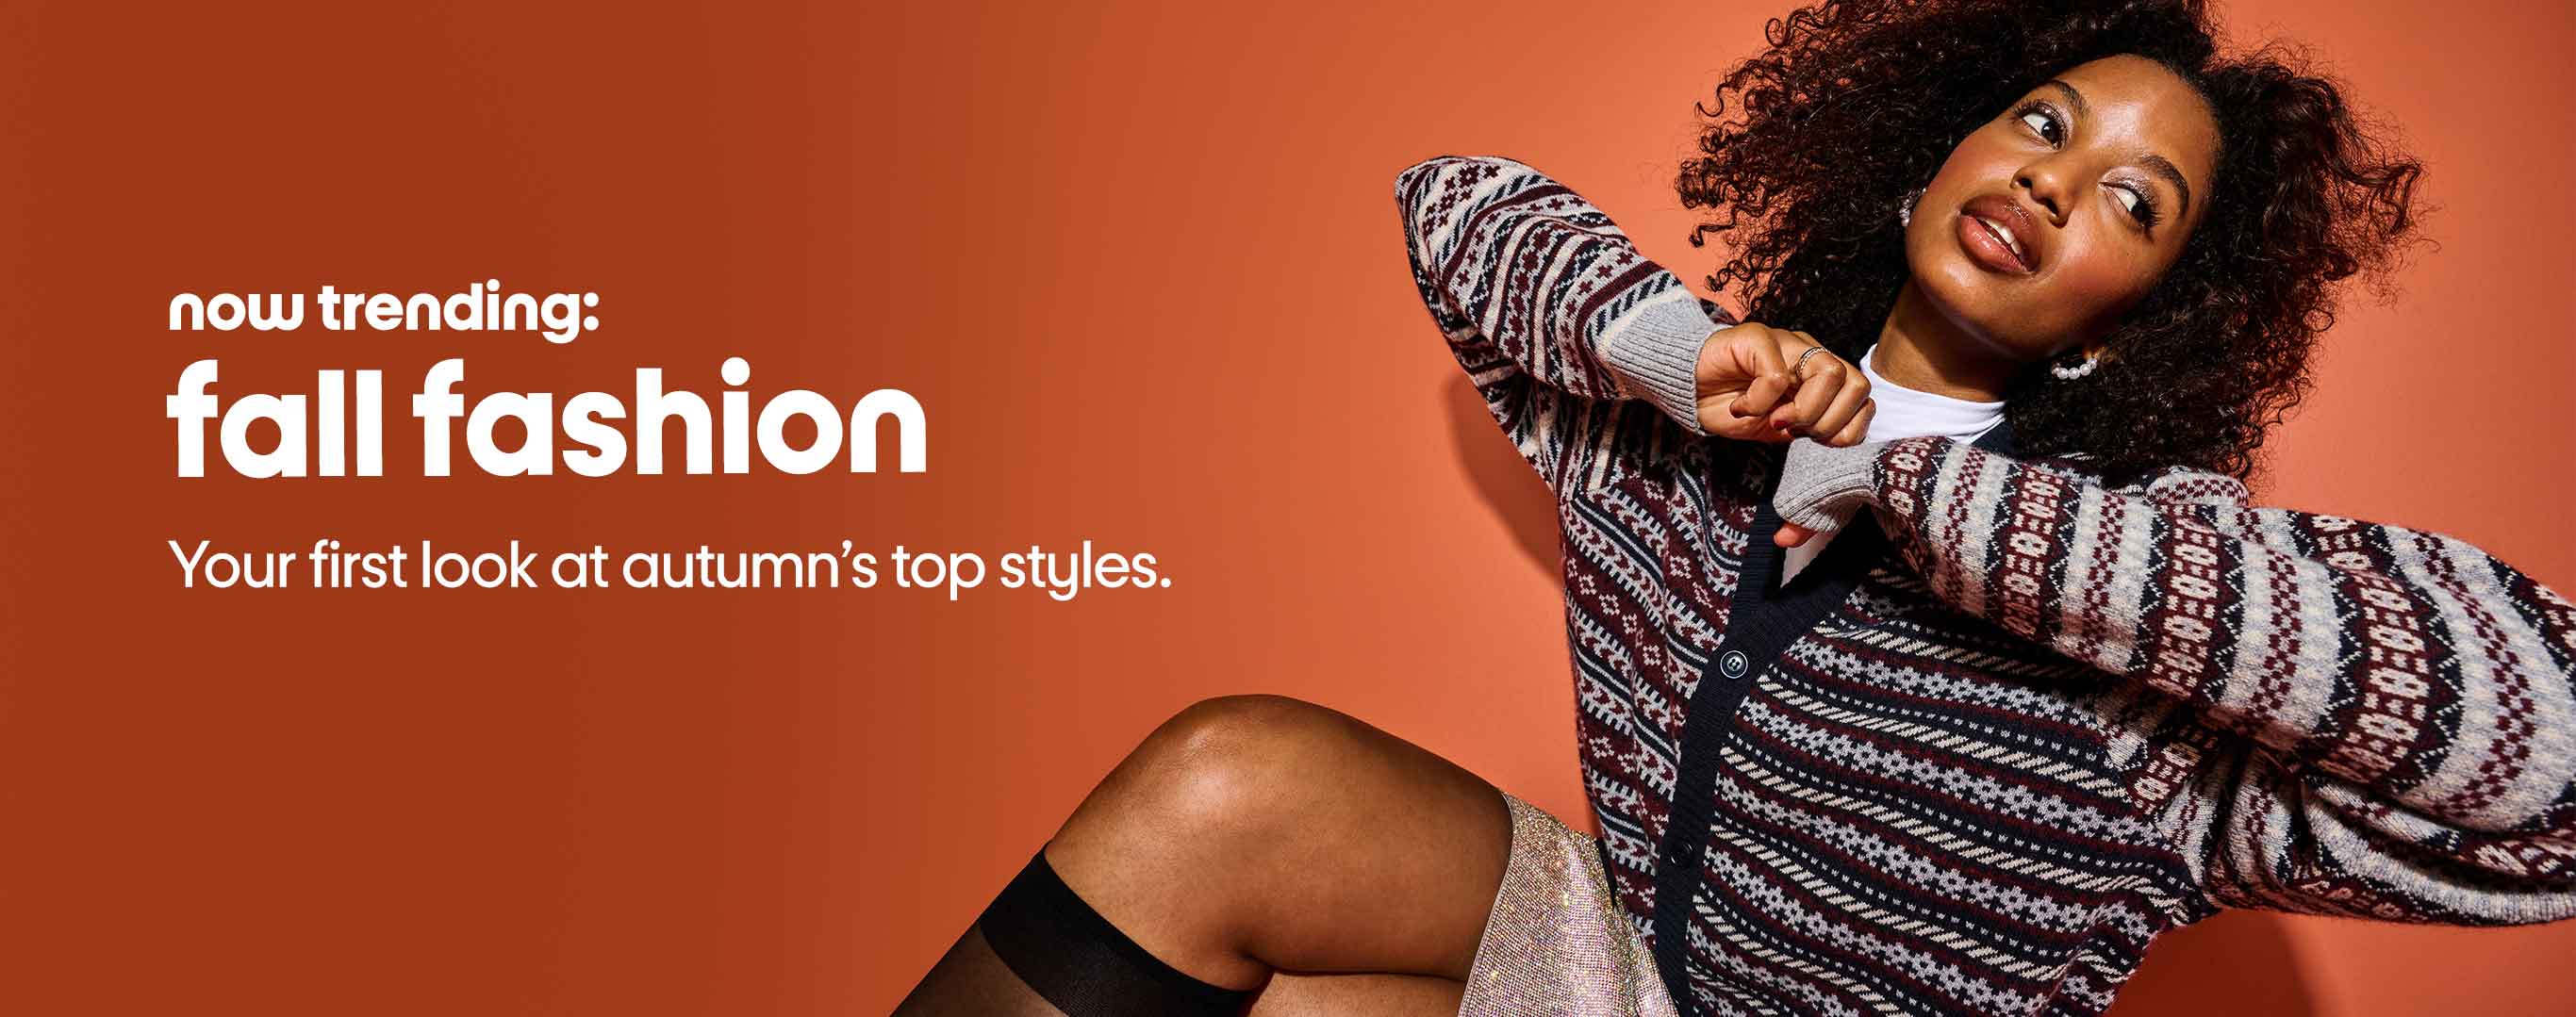 Now Trending - Fall Fashion. Your first look at autumn's top styles.